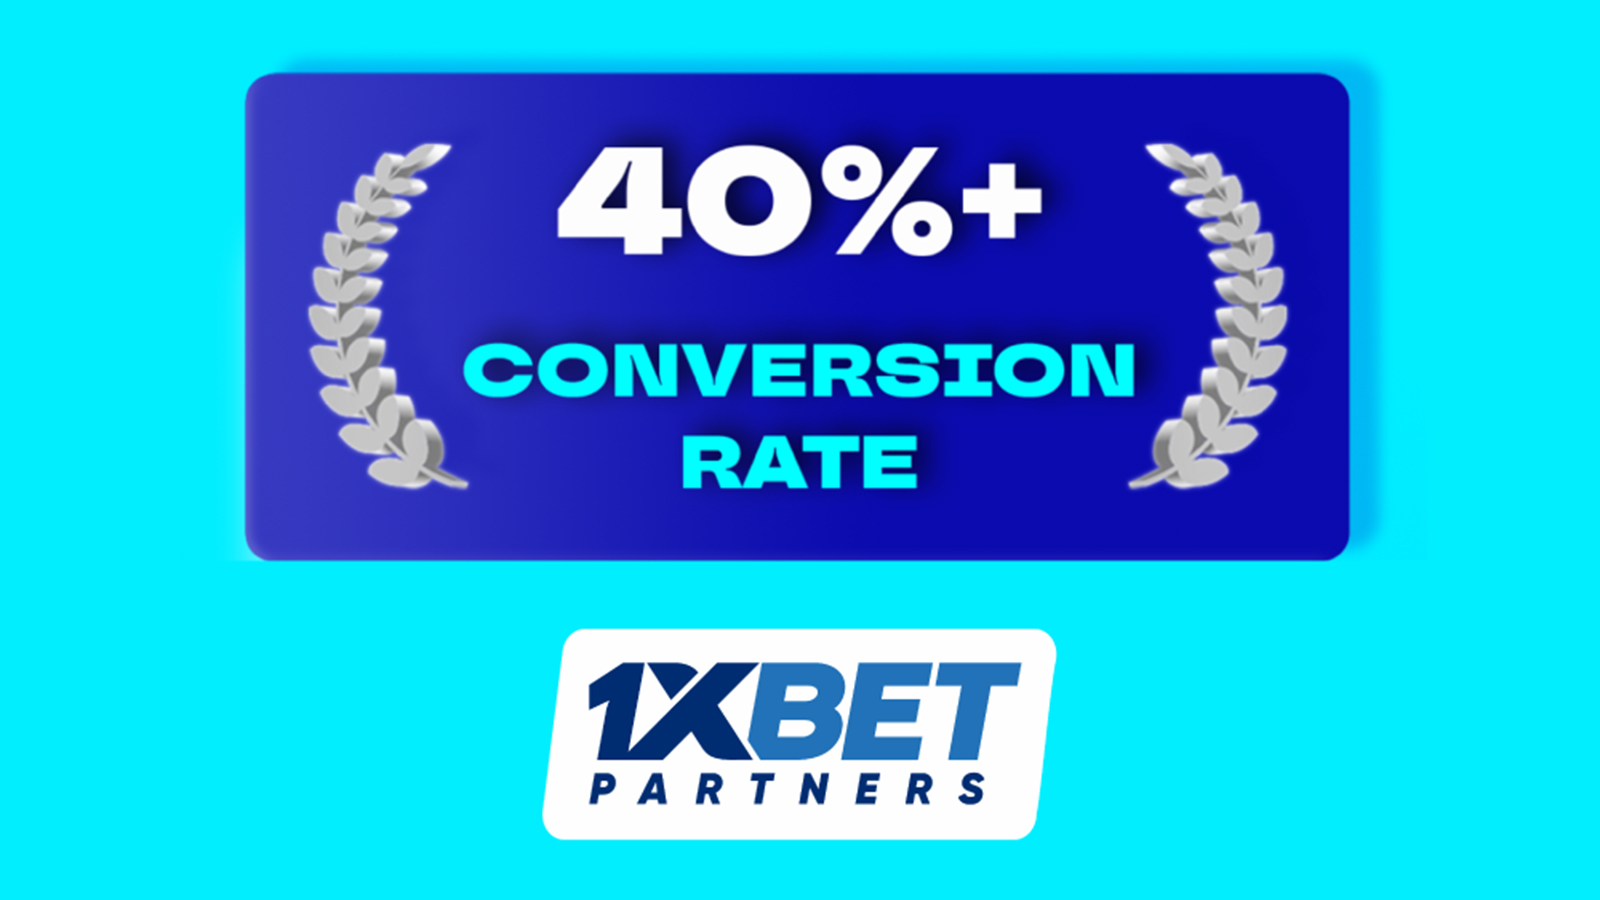 Partners 1xBet - The Ultimate Affiliate Program